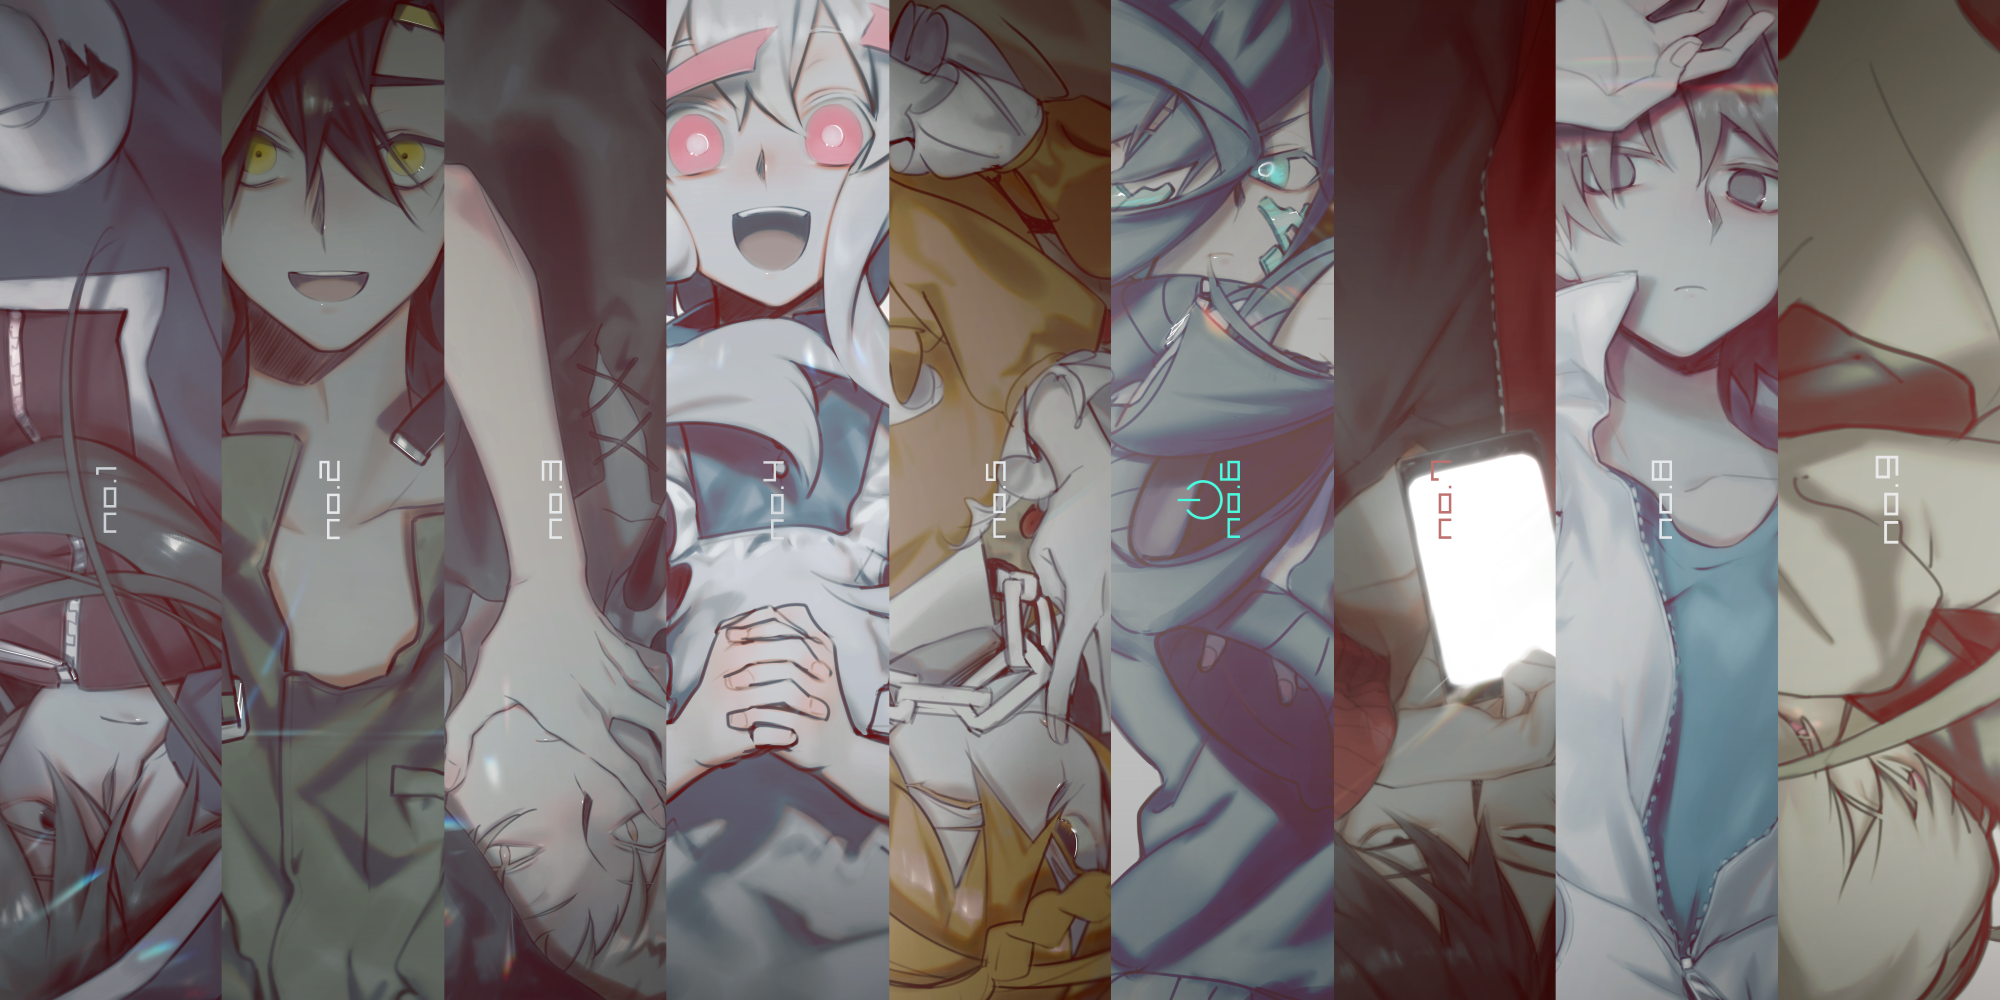 The main characters from KagerouProject